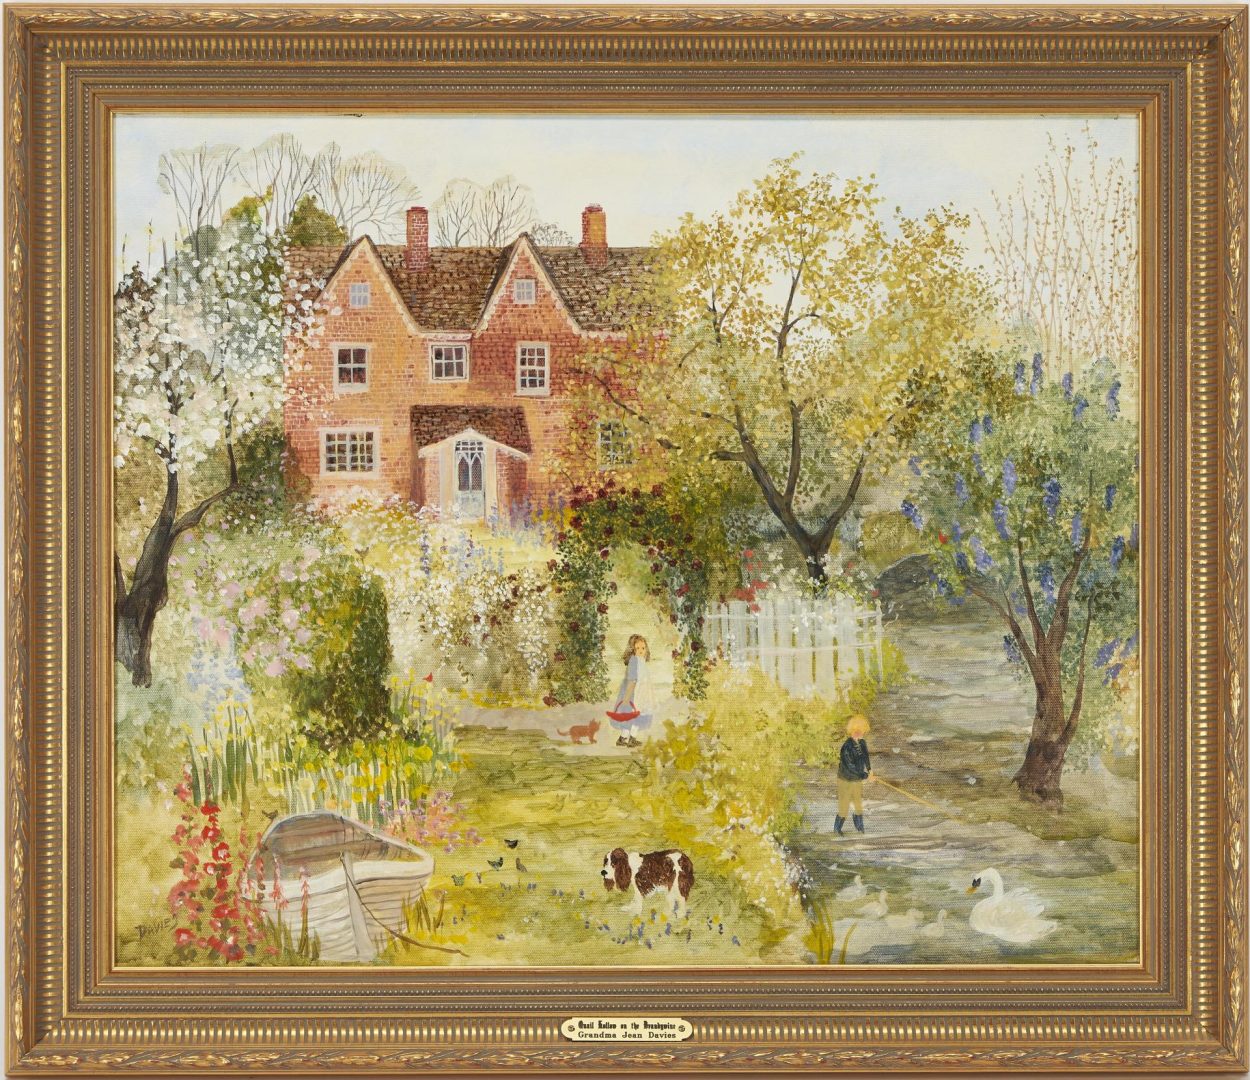 Lot 508: Jeanne Davies Architectural Oil Painting "Quail Hollow on the Brandywine"